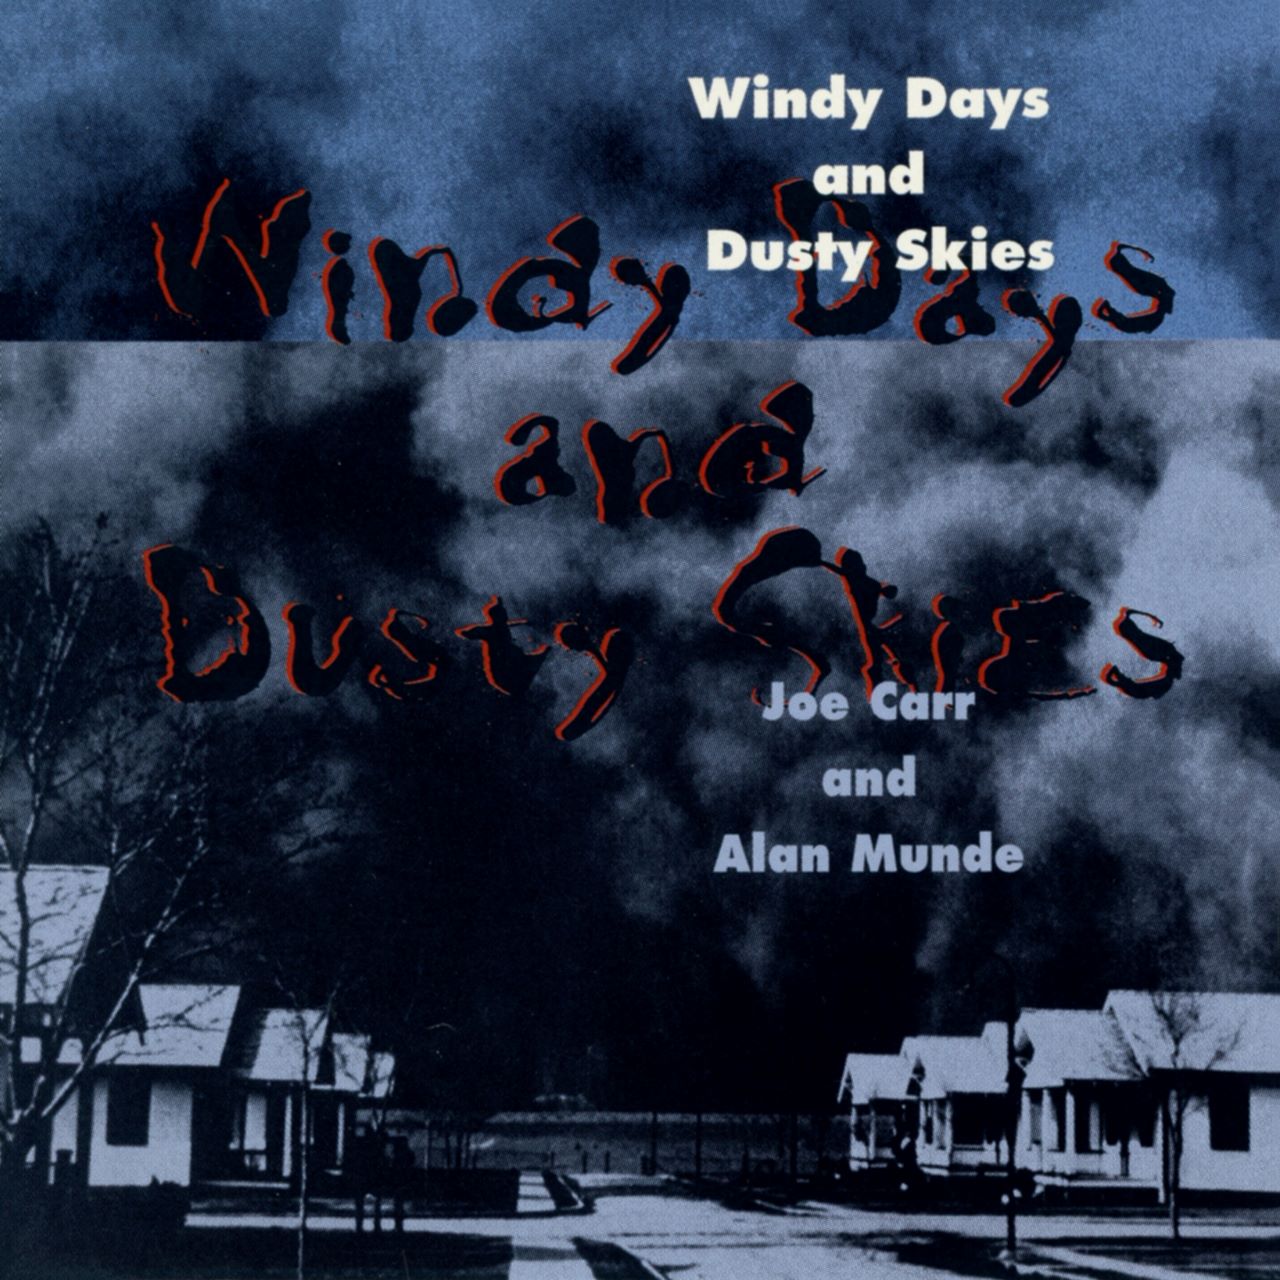 Joe Carr & Alan Munde - Windy Days And Dusty Skies cover album